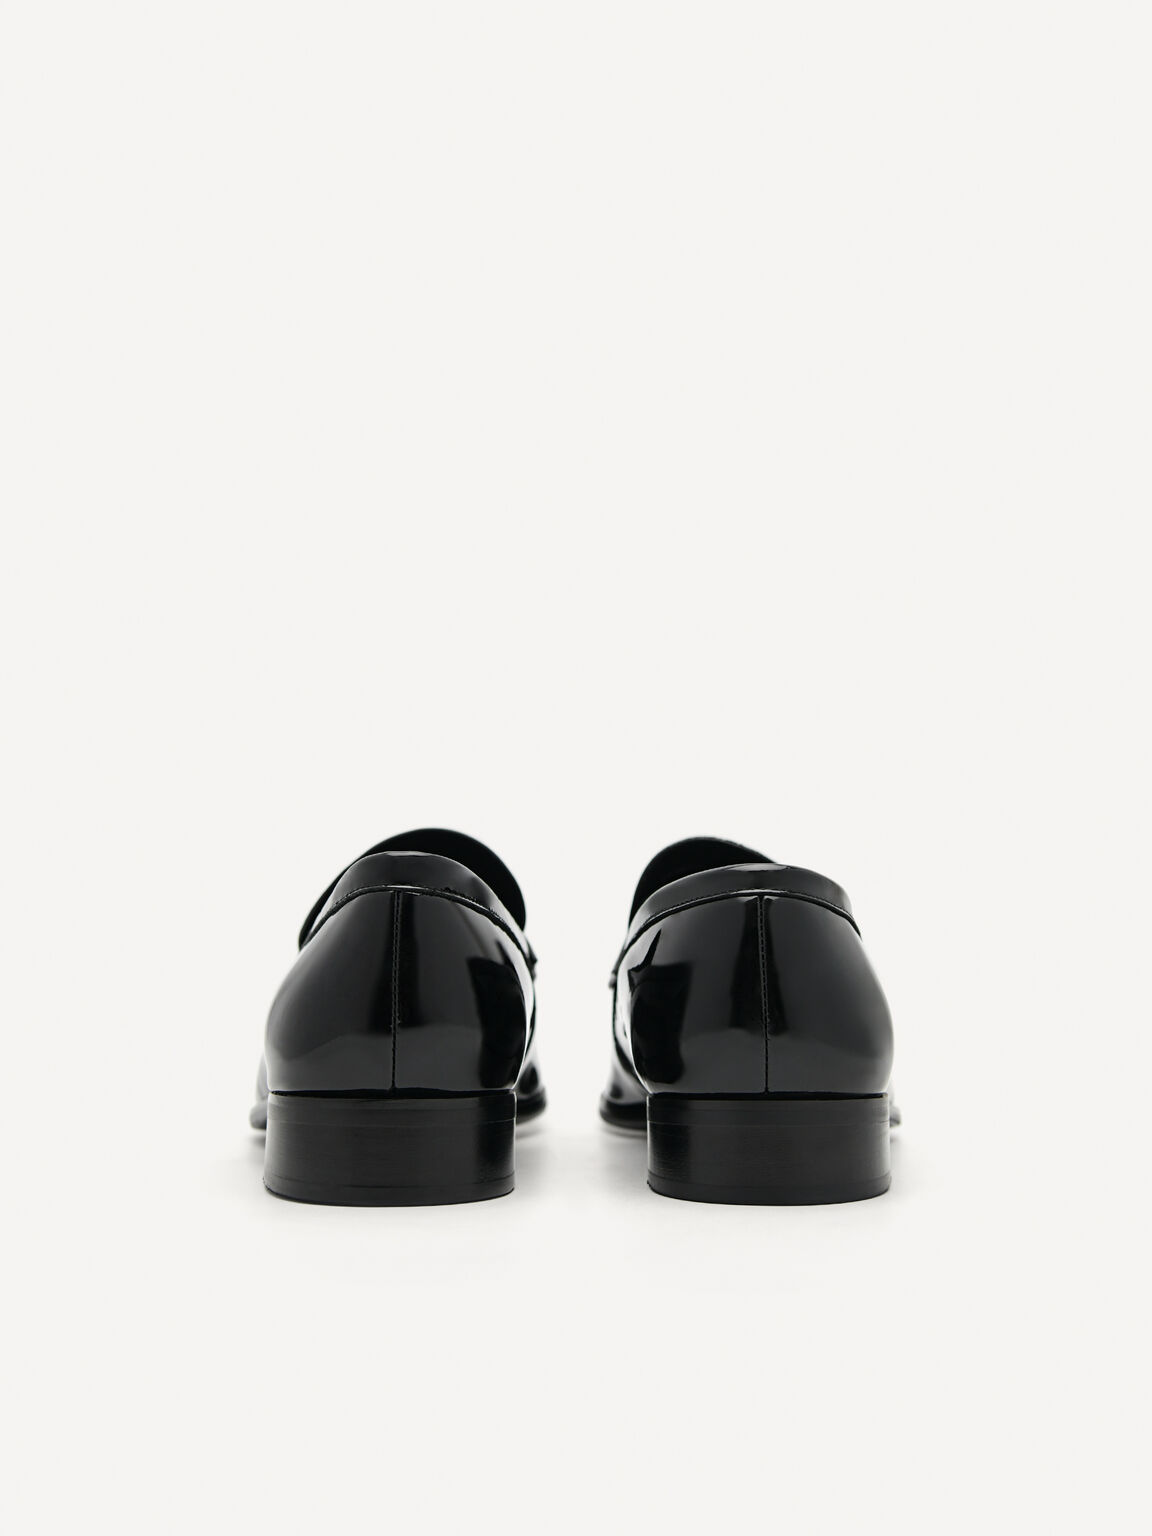 Patent Leather Penny Loafer, Black